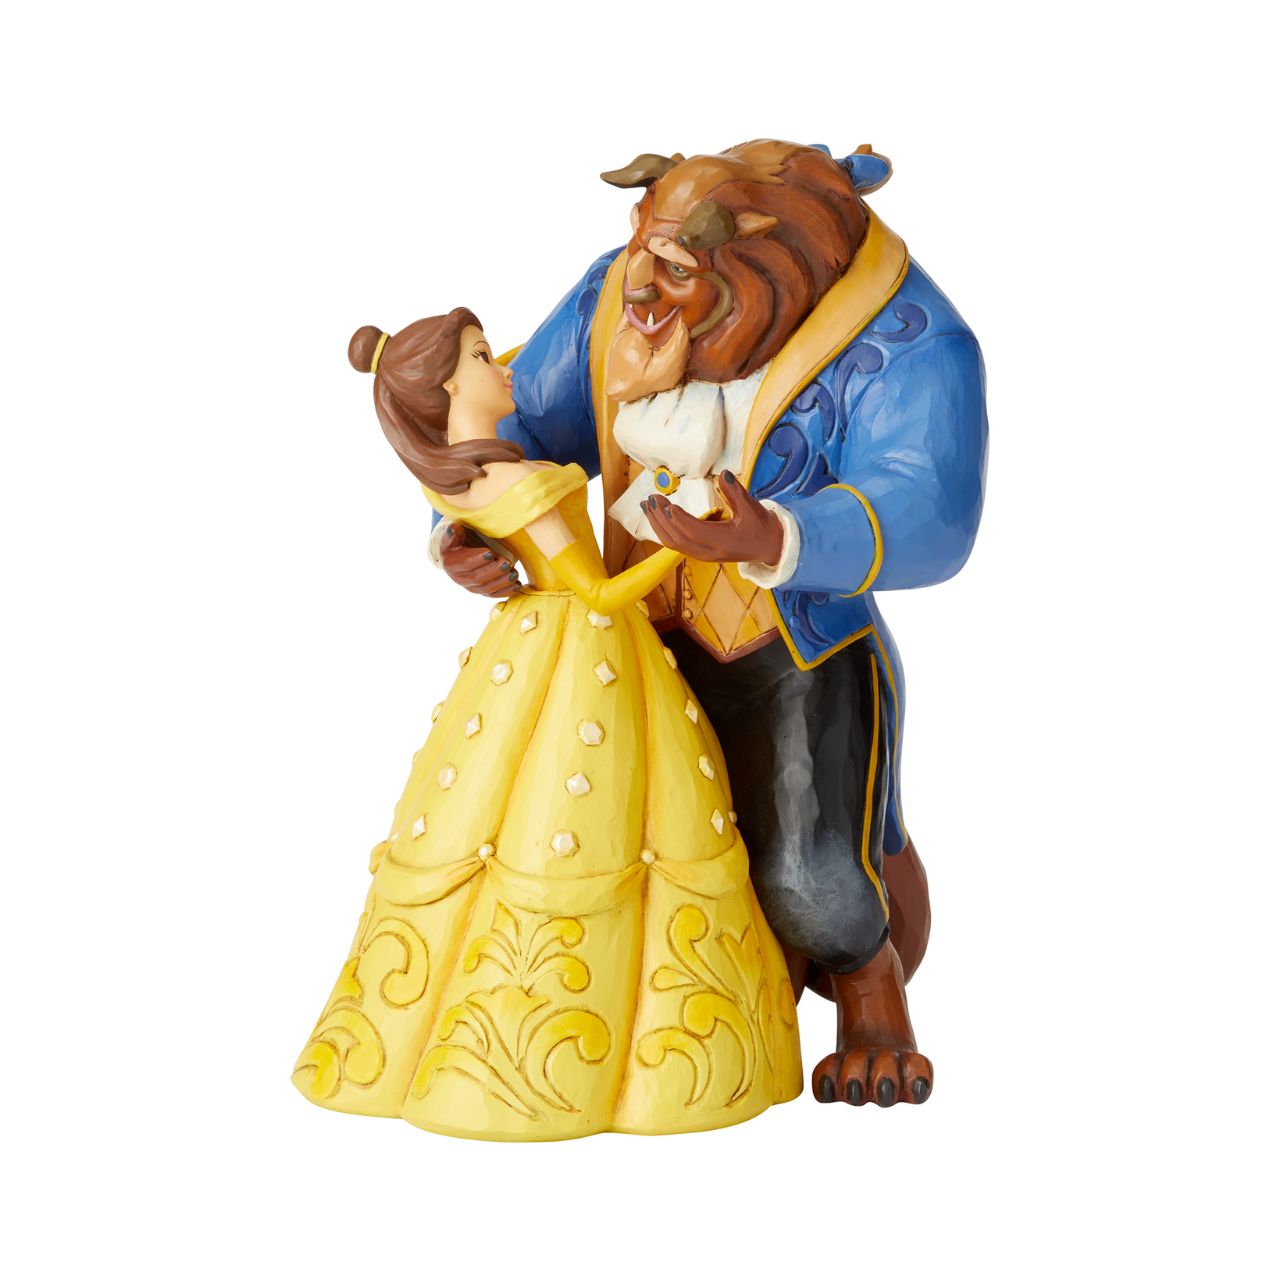 Disney Moonlight Waltz Beauty and The Beast Figurine by Jim Shore  Jim Shore celebrates the 25th anniversary of the Disney classic film Beauty and The Beast with this enchanting double figurine inspired by the romantic ballroom scene when Belle and her suitor discover their love is a tale as old as time.